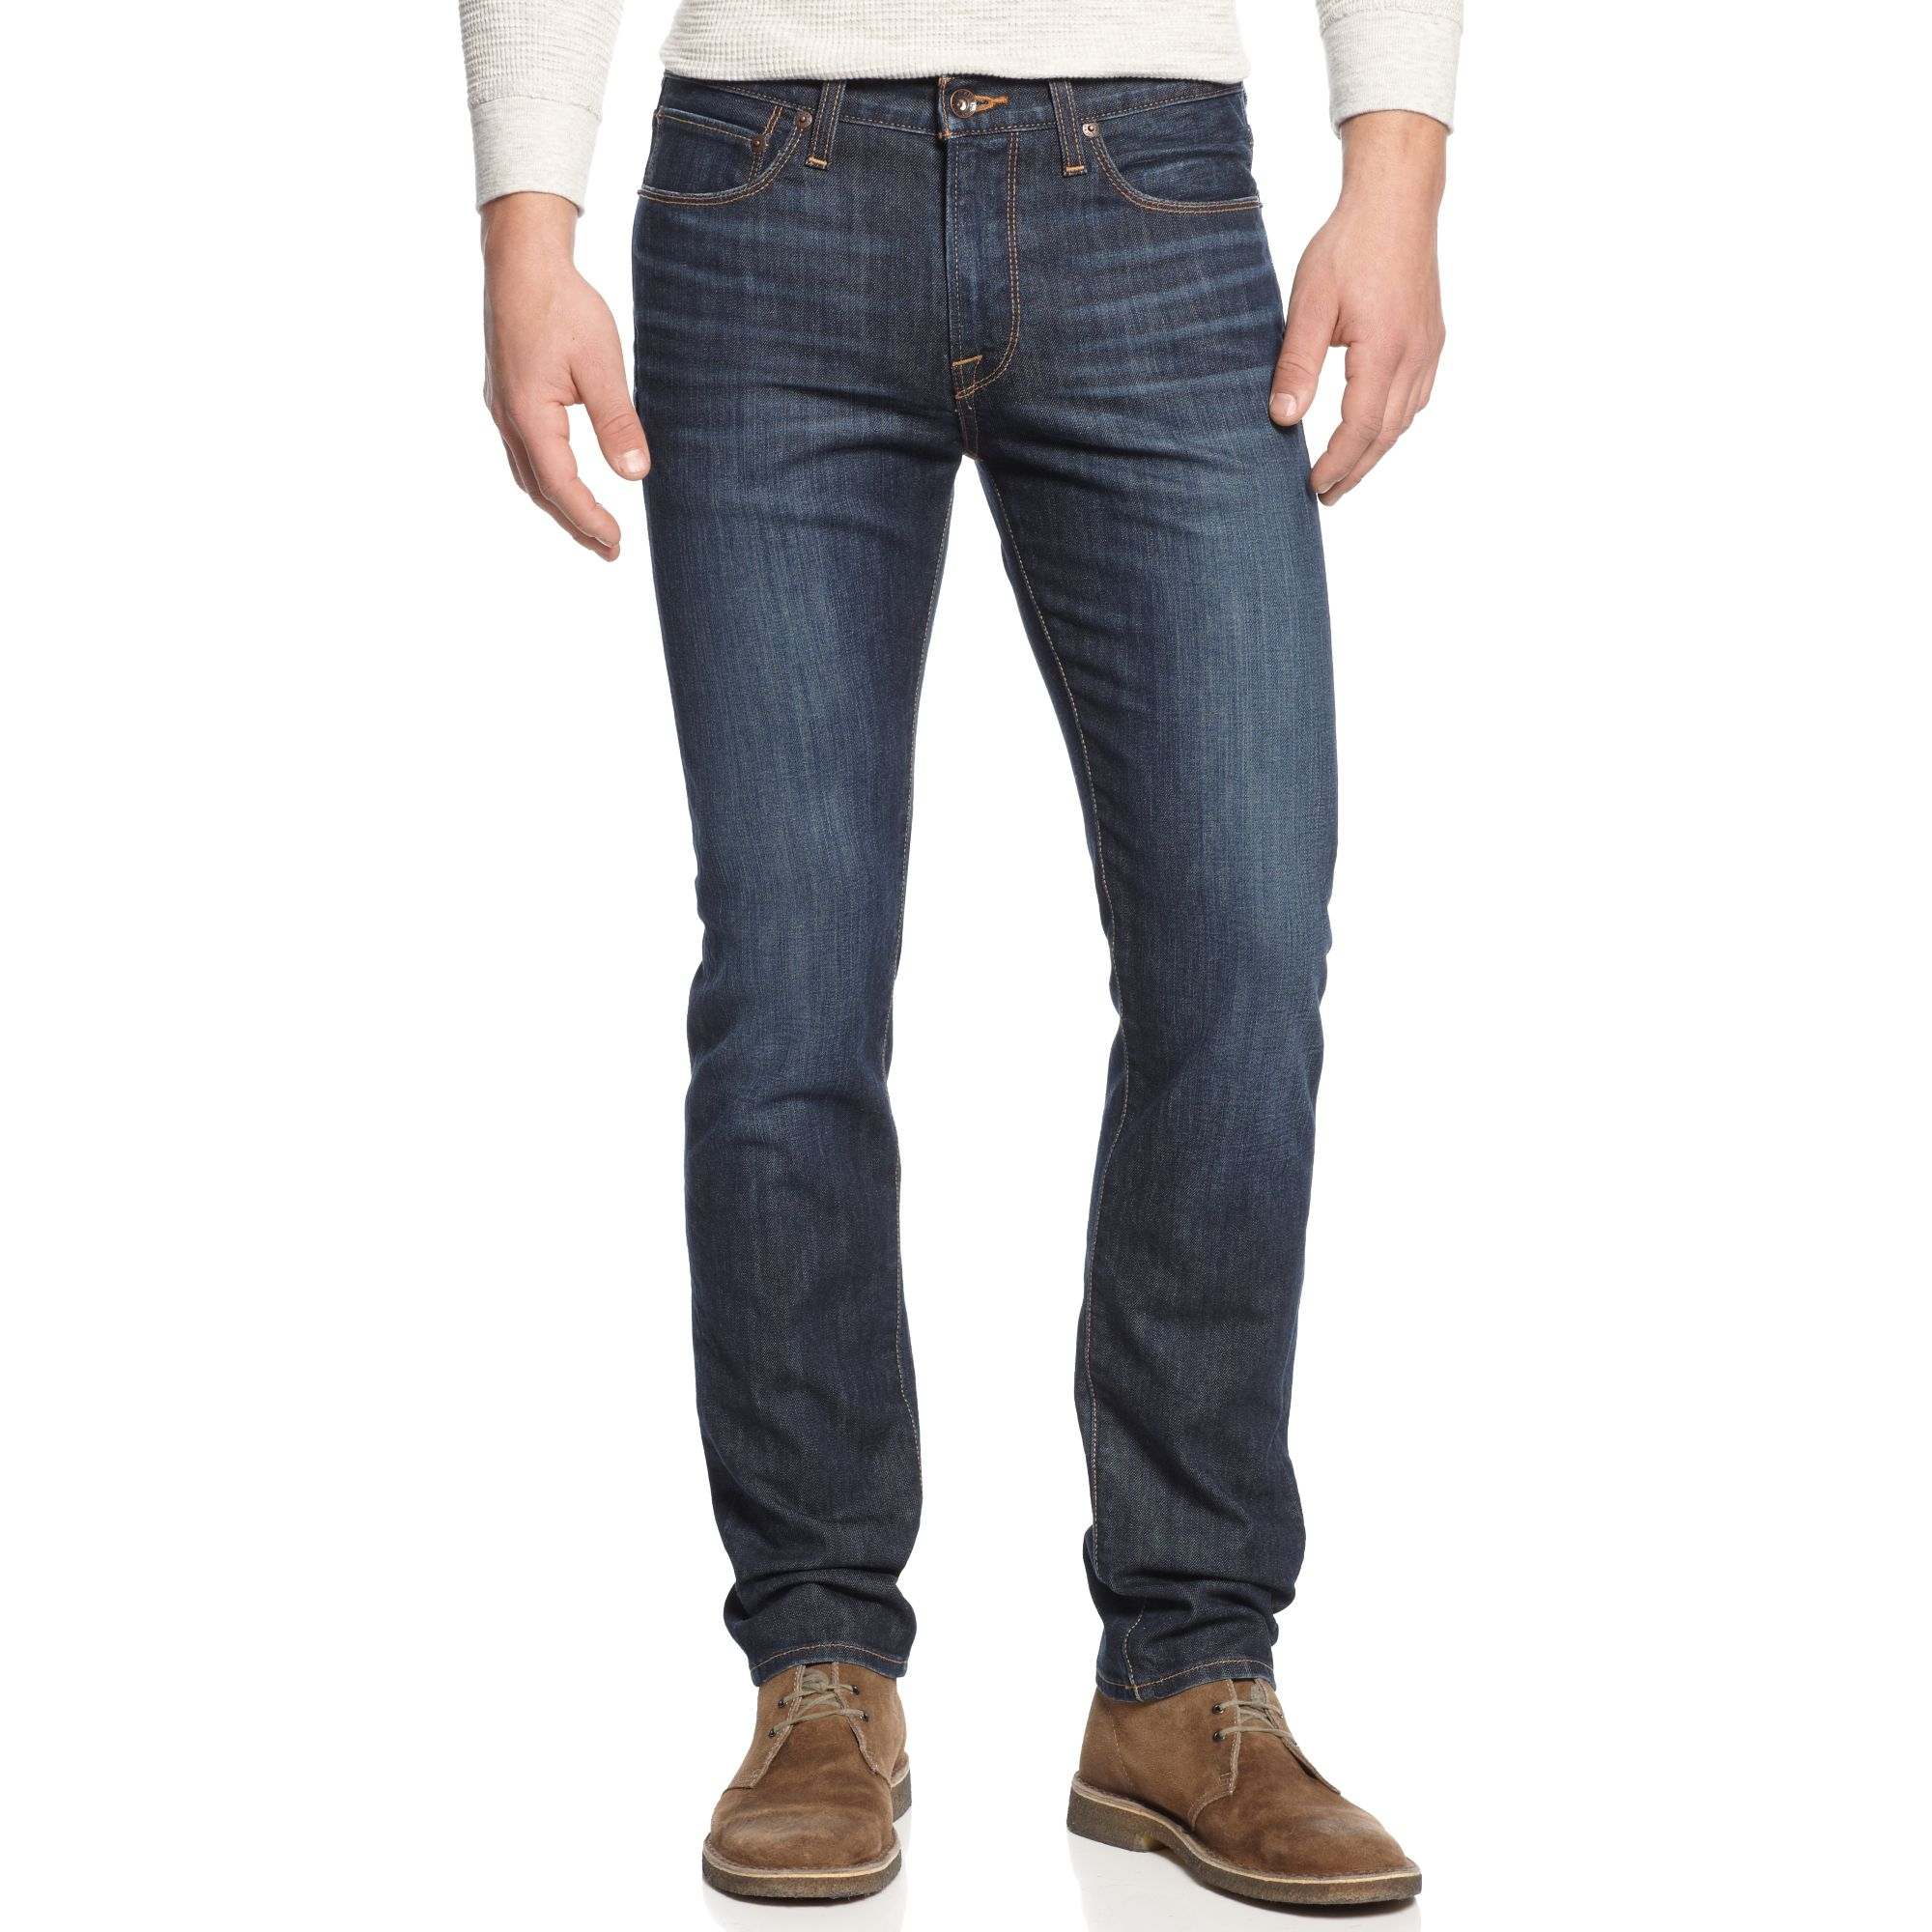 Lyst - Lucky Brand Authentic Skinny Jeans in Blue for Men